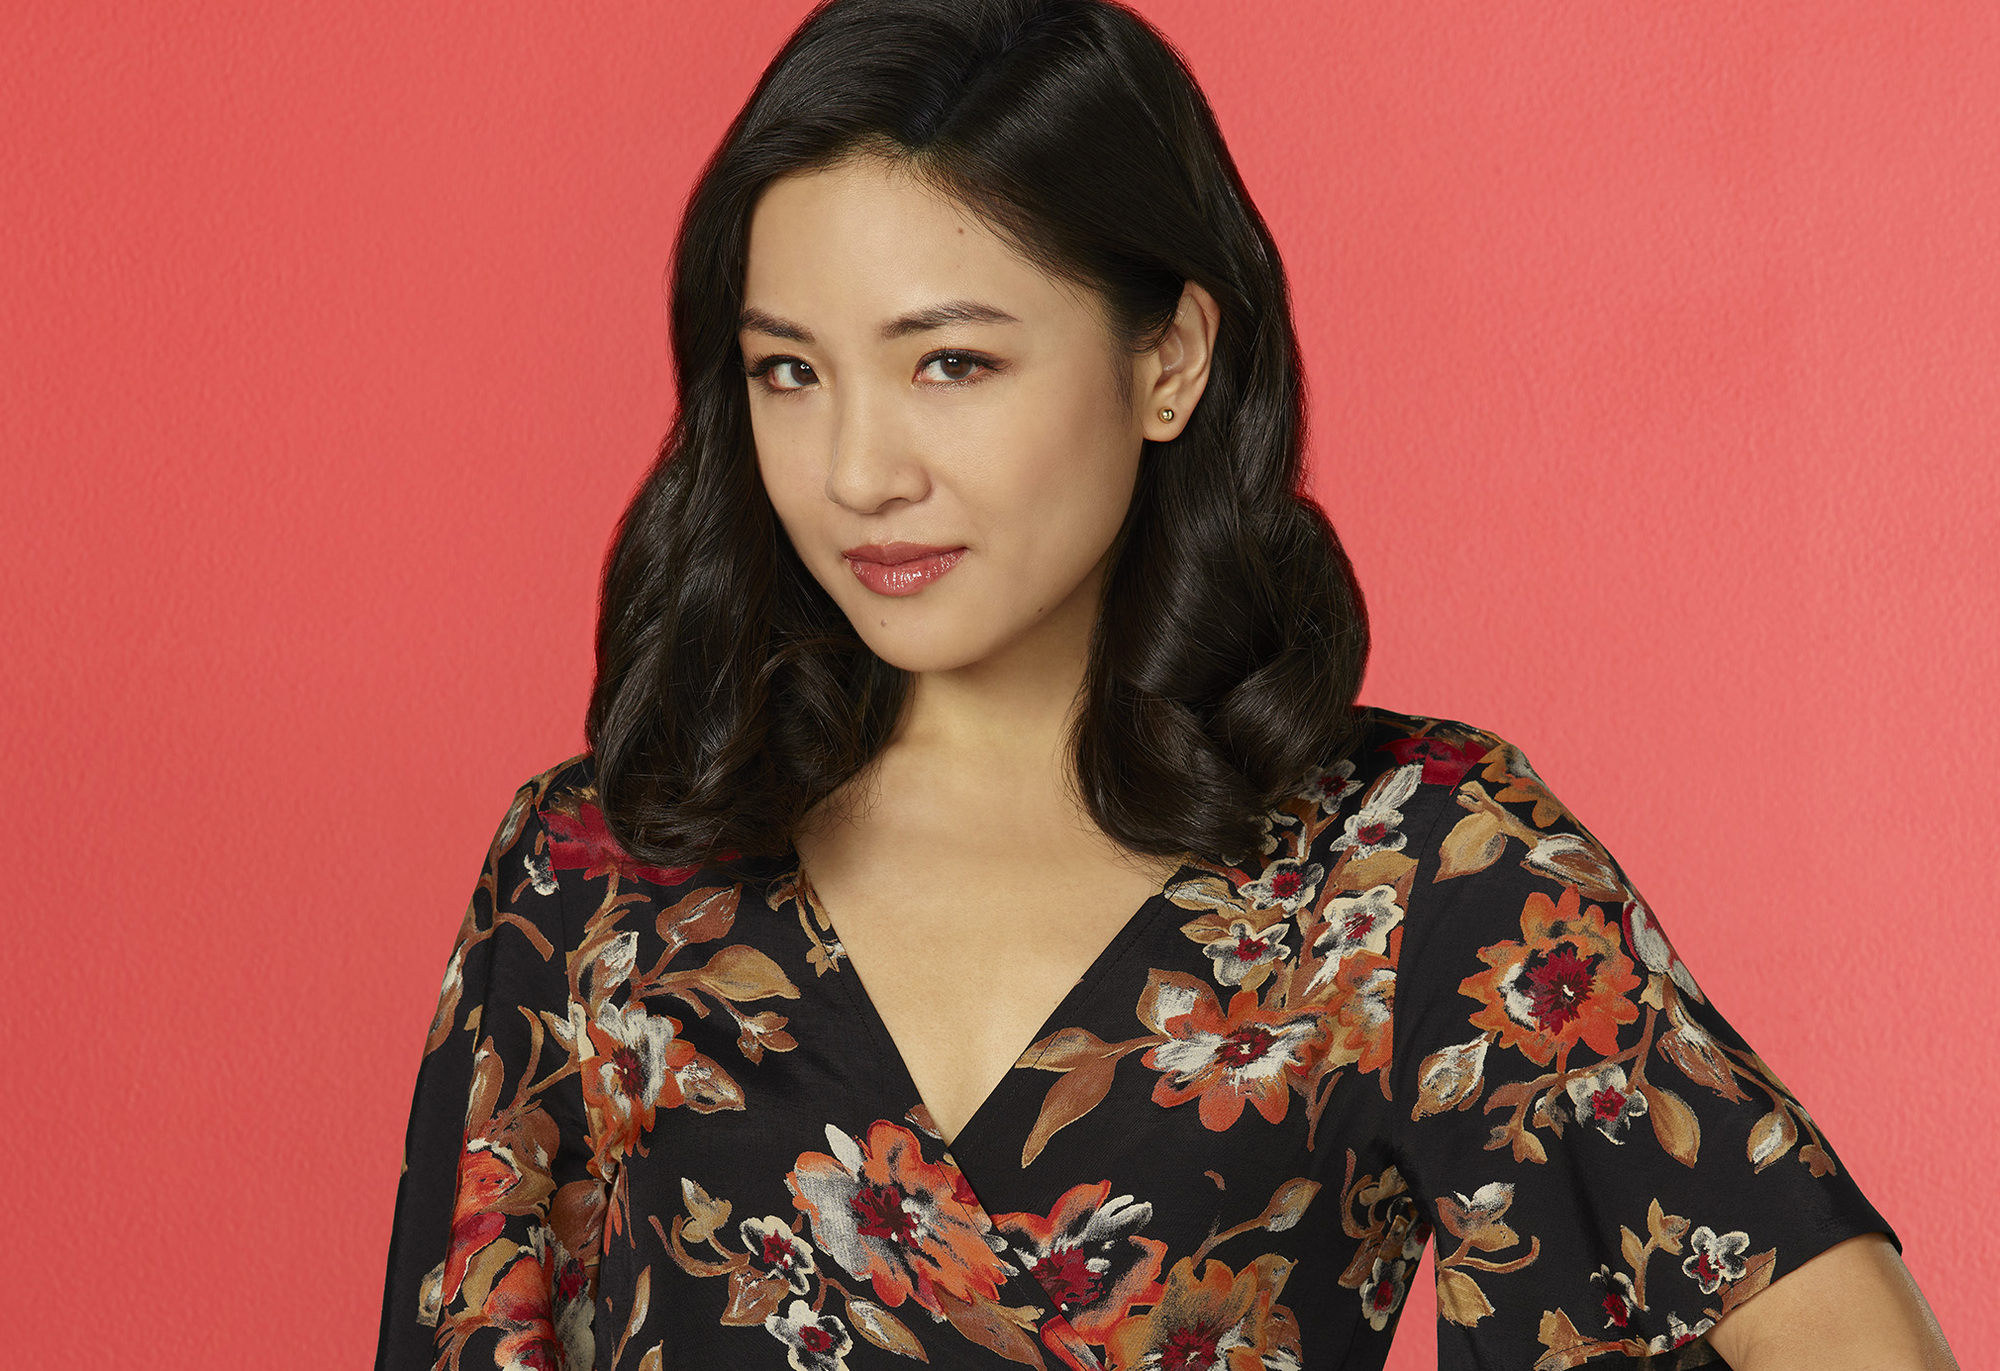 ABC’s “Fresh Off the Boat” stars Constance Wu as Jessica Huang.